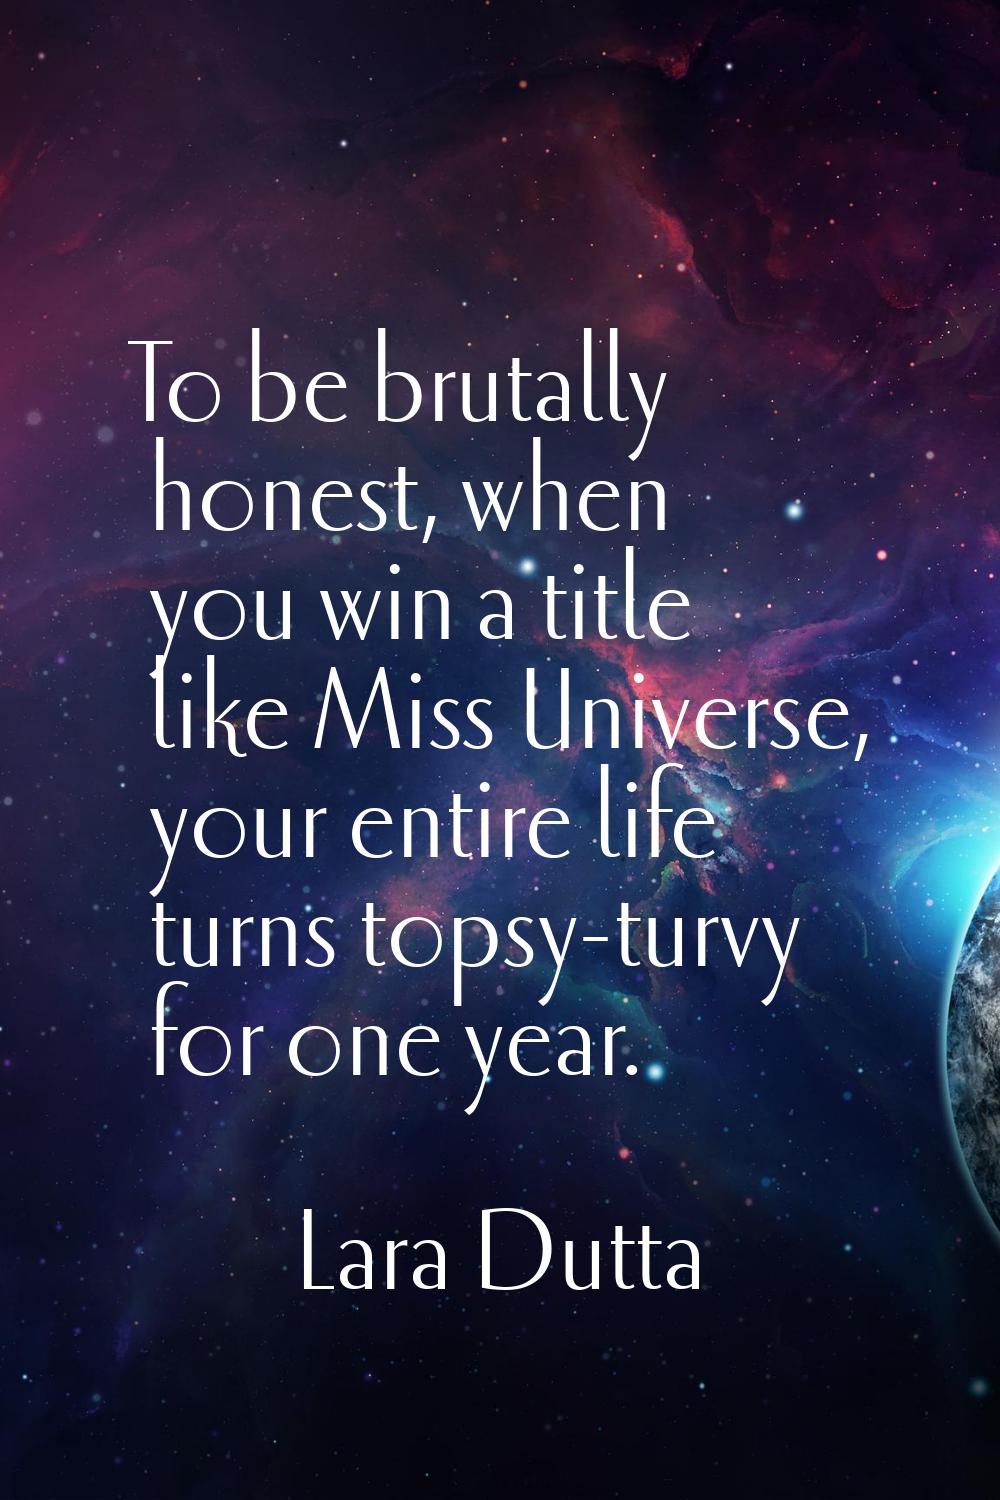 To be brutally honest, when you win a title like Miss Universe, your entire life turns topsy-turvy 